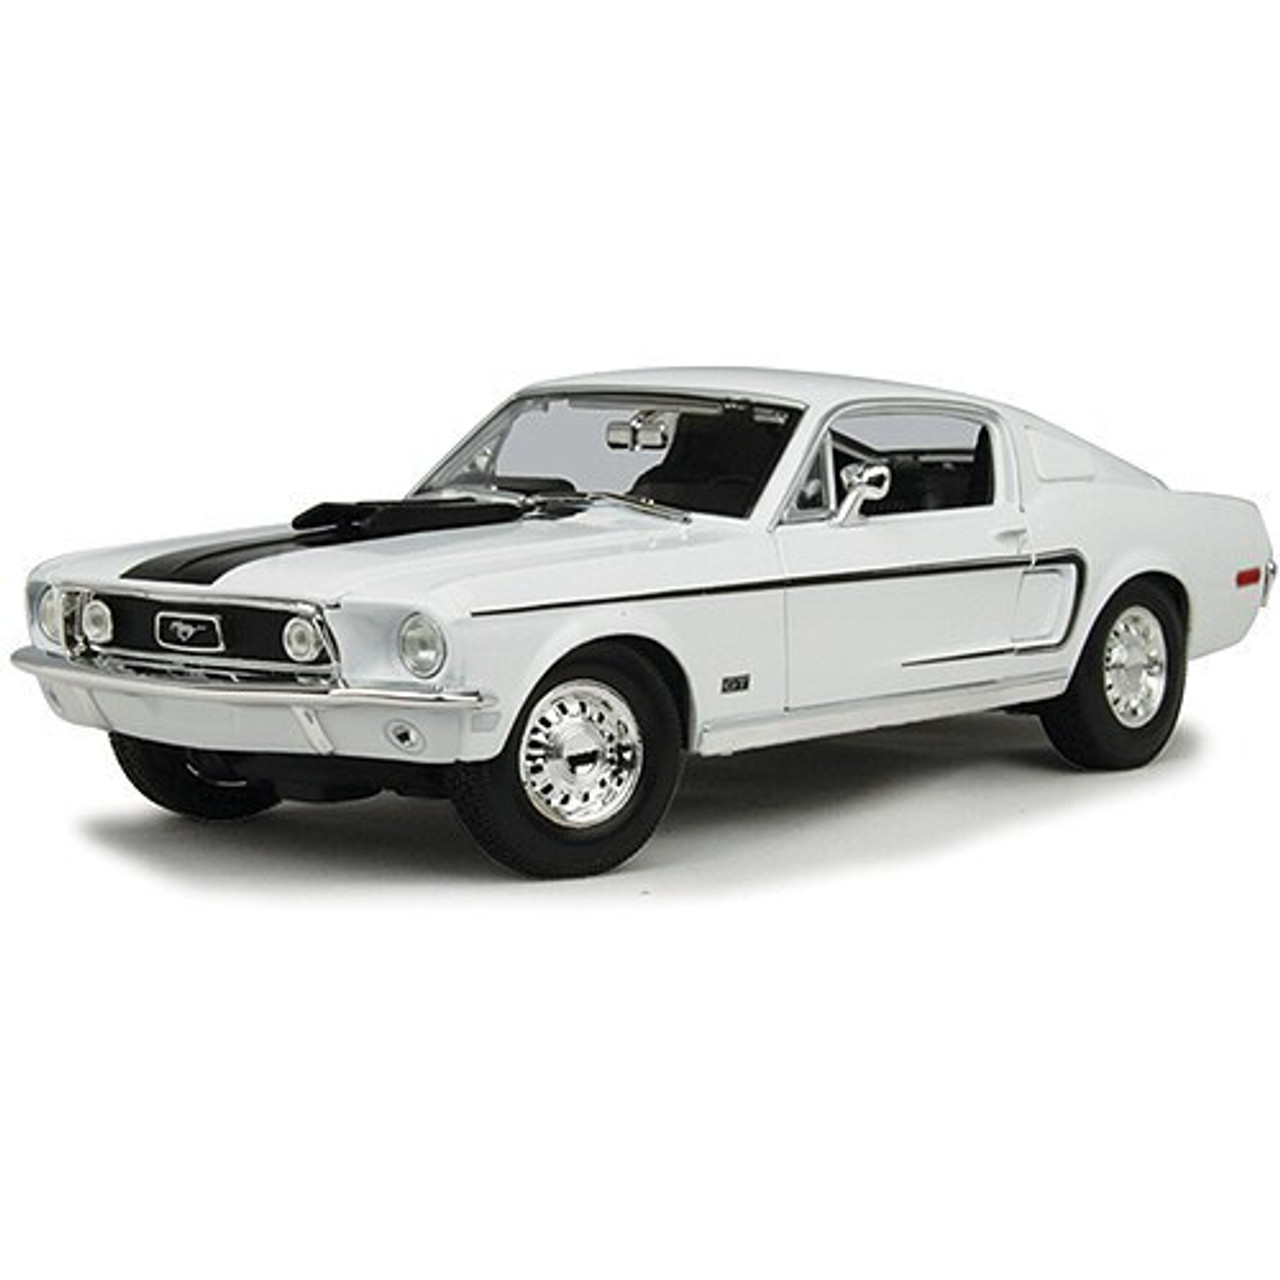 1968 Ford Mustang GT Cobra Jet - white 1:18 Scale Diecast Model by Maisto |  Collectable Diecast